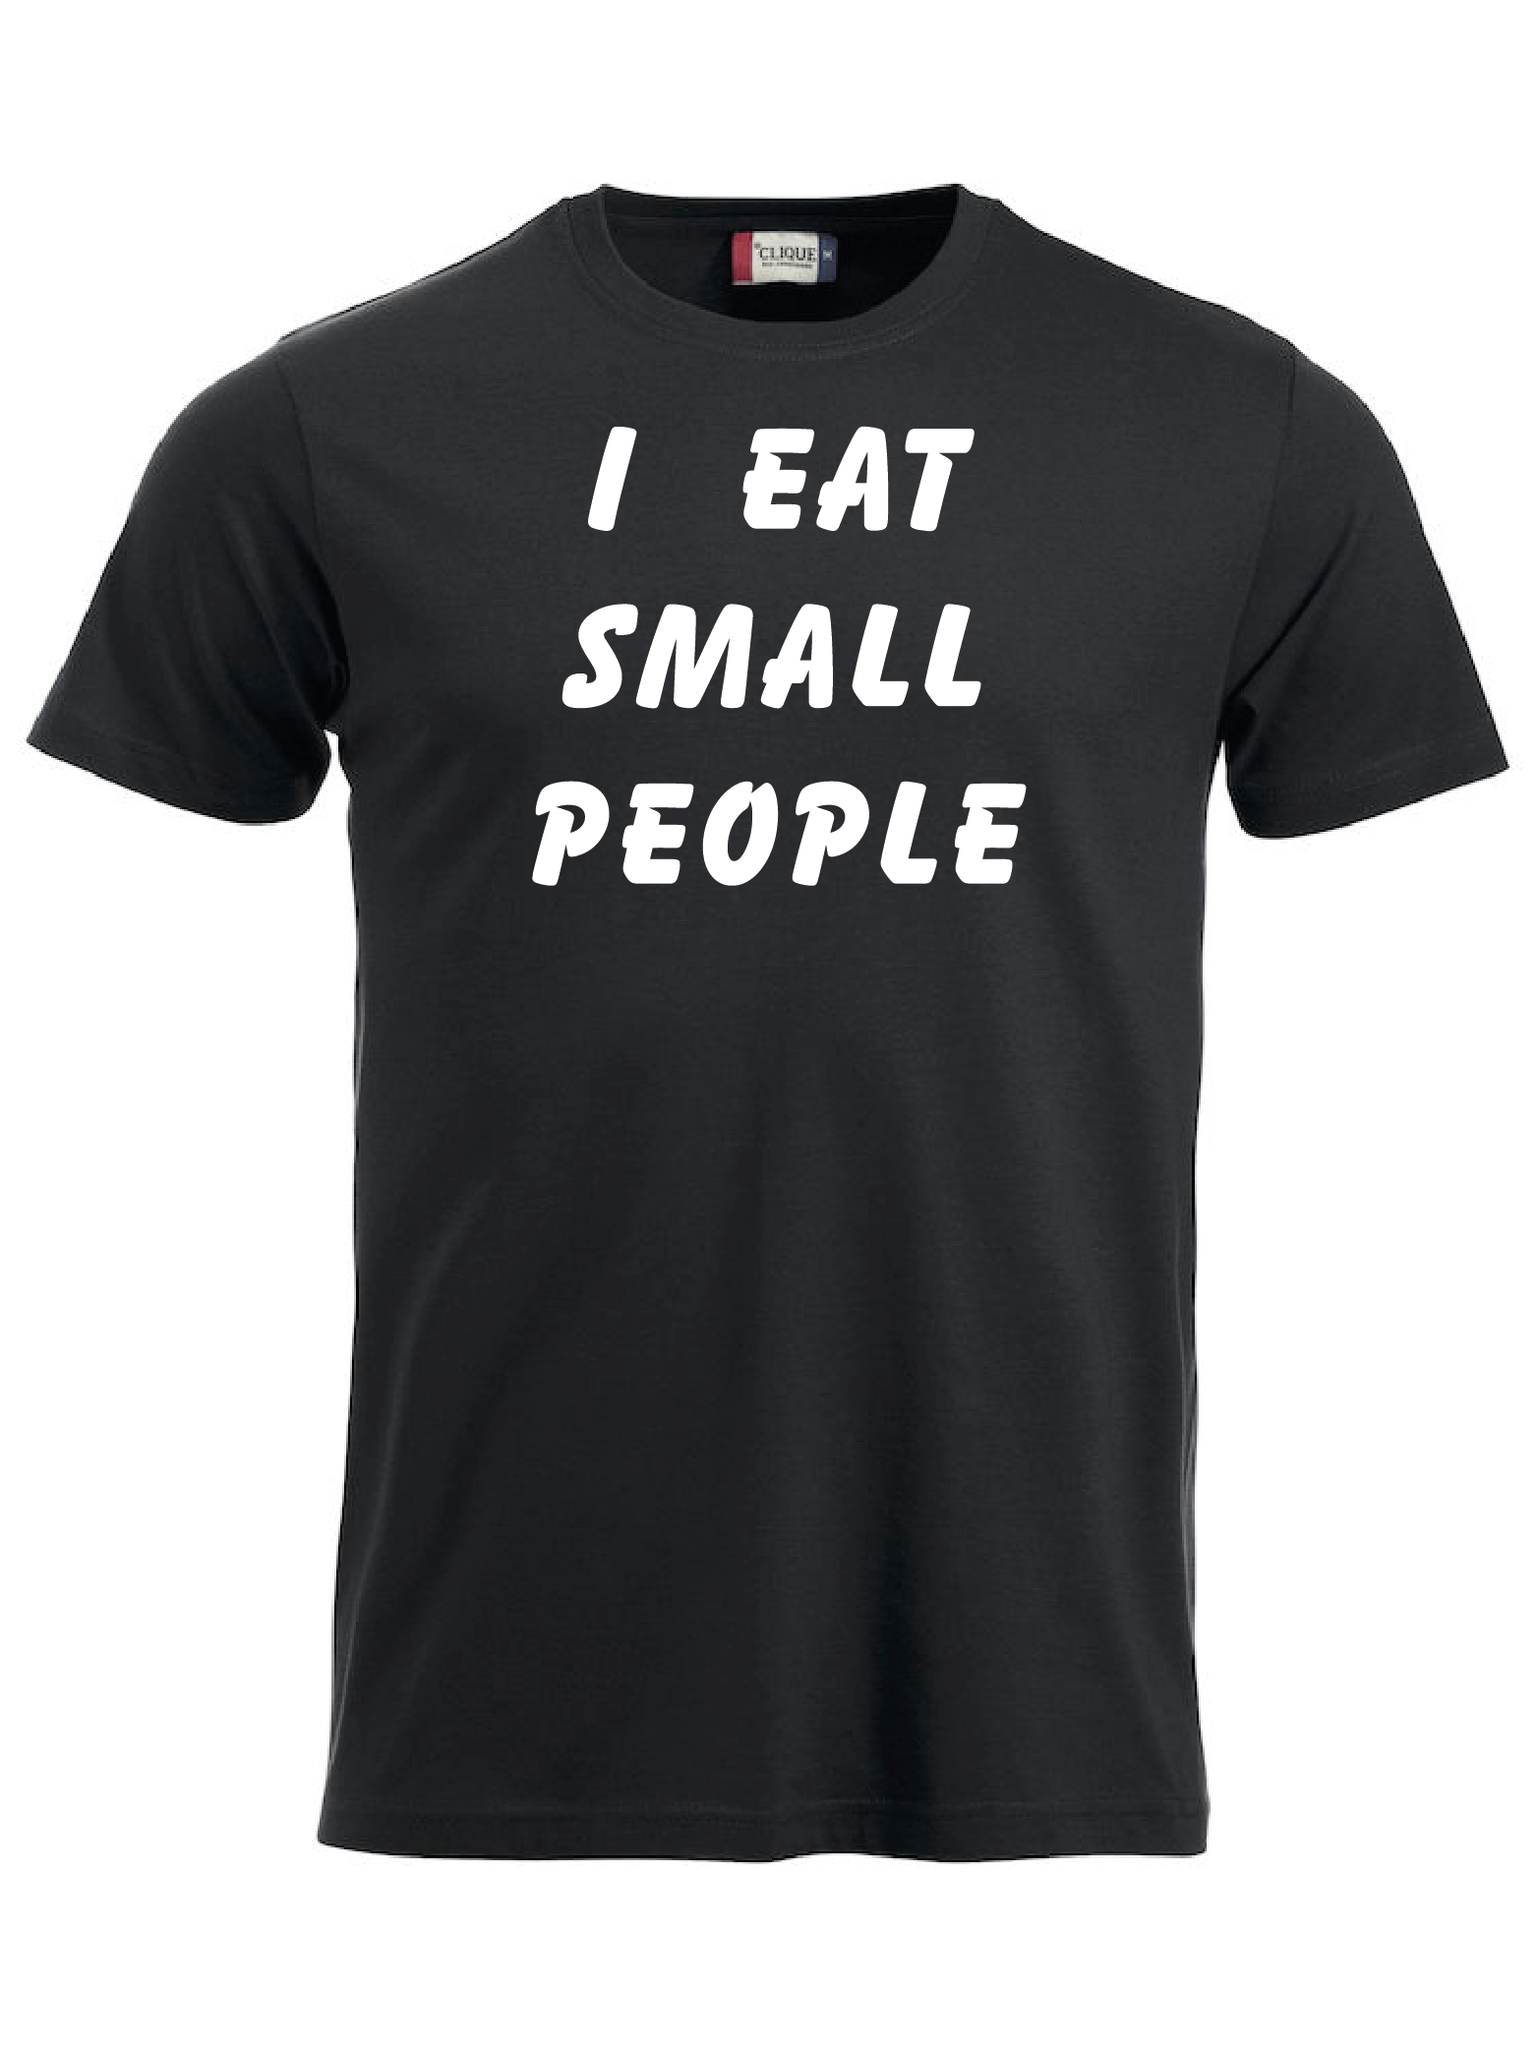 T-shirt "I EAT SMALL PEOPLE"